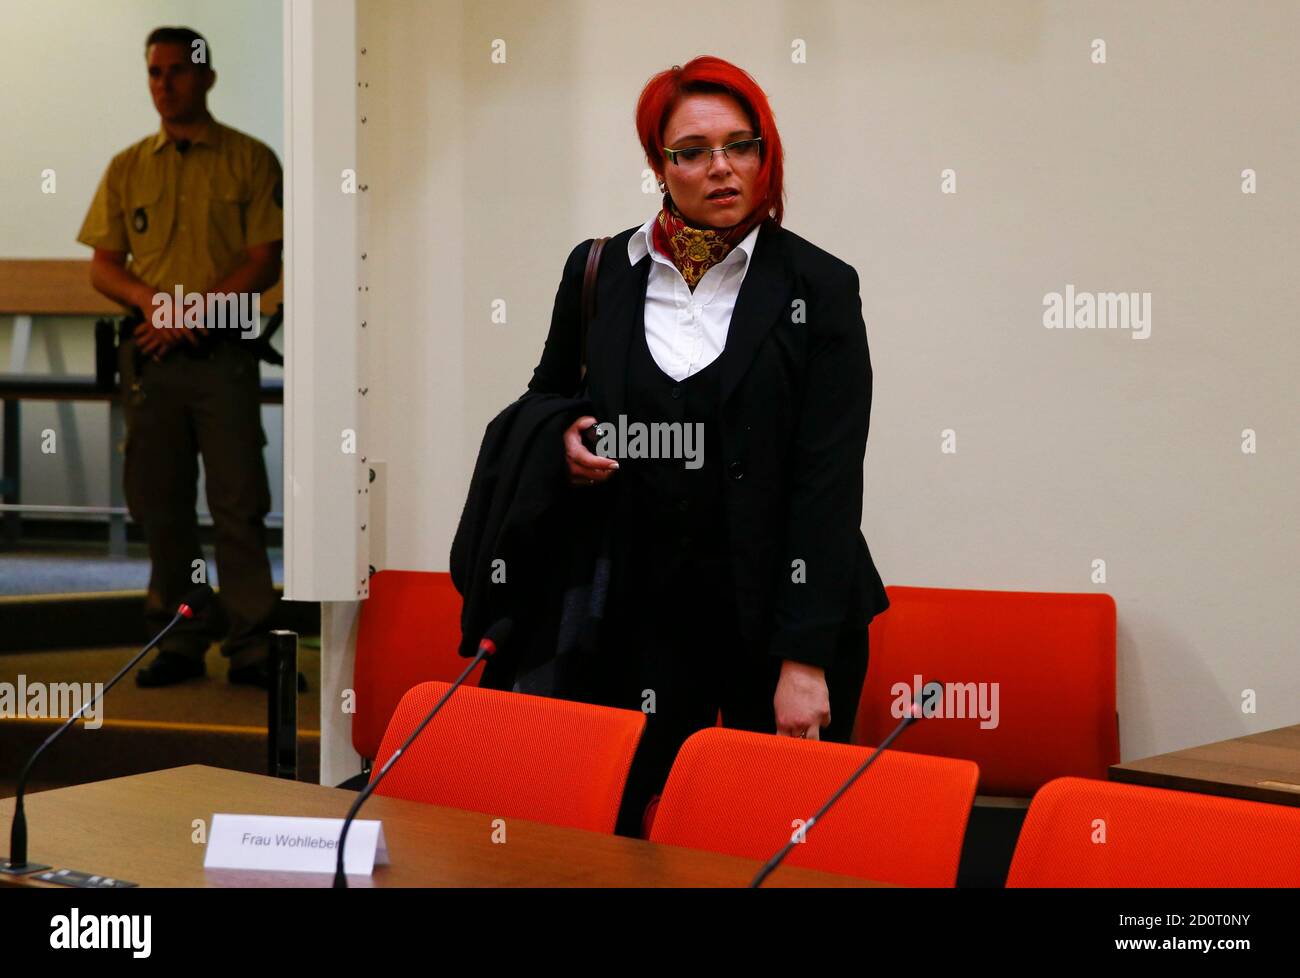 Nicole Schneiders, lawyer of Ralf Wohlleben, stands in the courthouse  before the start of the trial in Munich May 6, 2013. The surviving member  of NSU blamed for a series of racist